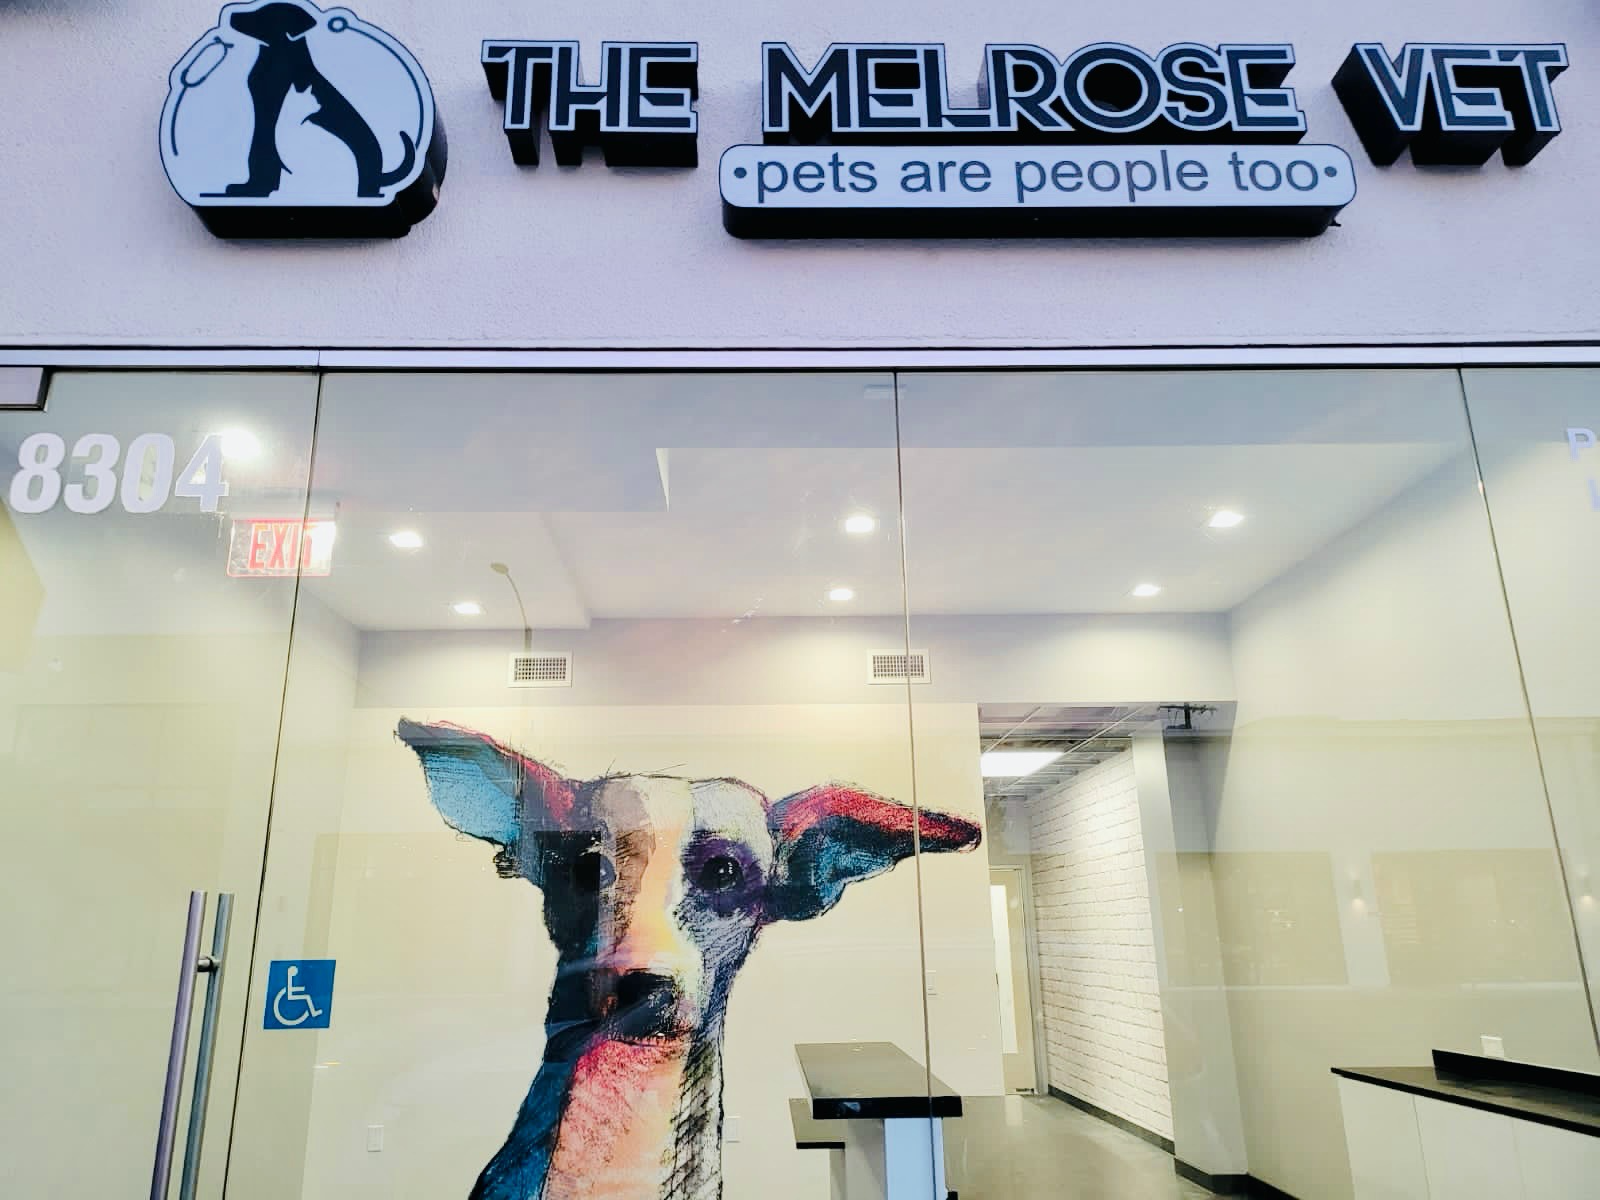 The Melrose Vet, Thursday, May 26, 2022, Press release picture